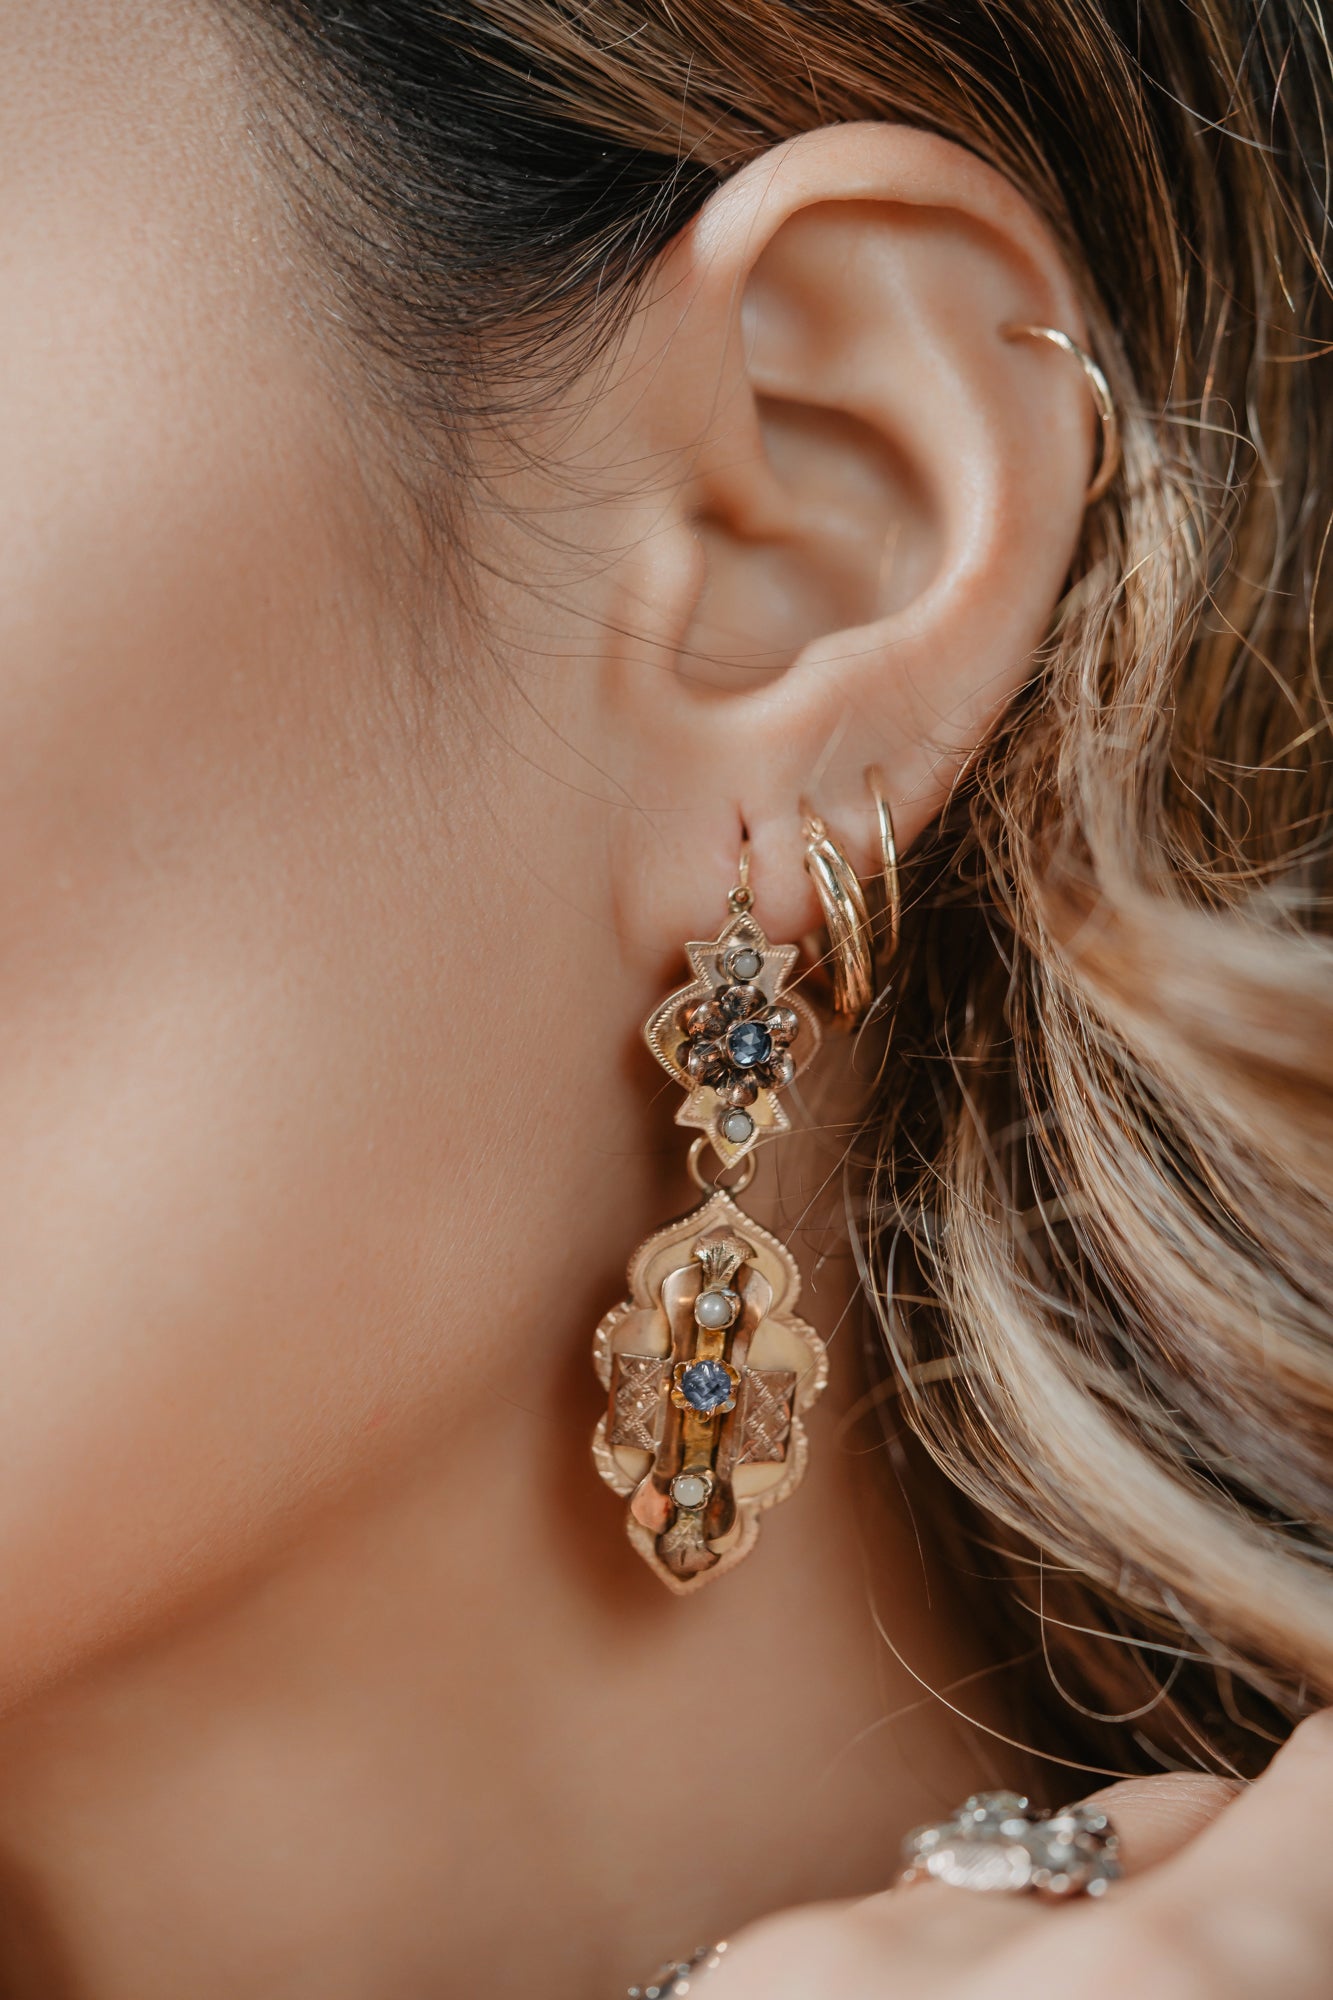 Statement and classy antique rose gold earrings. These feminine antique earrings are made of so-called borbonic gold (8kt) and are set with natural pearls and white saphirette glass. The gold has a warm rosy shade and is complimetary to any skin color.  The earrings consist of two parts - the main part and detachable lower chandelier. Such model is called day and night earrings.